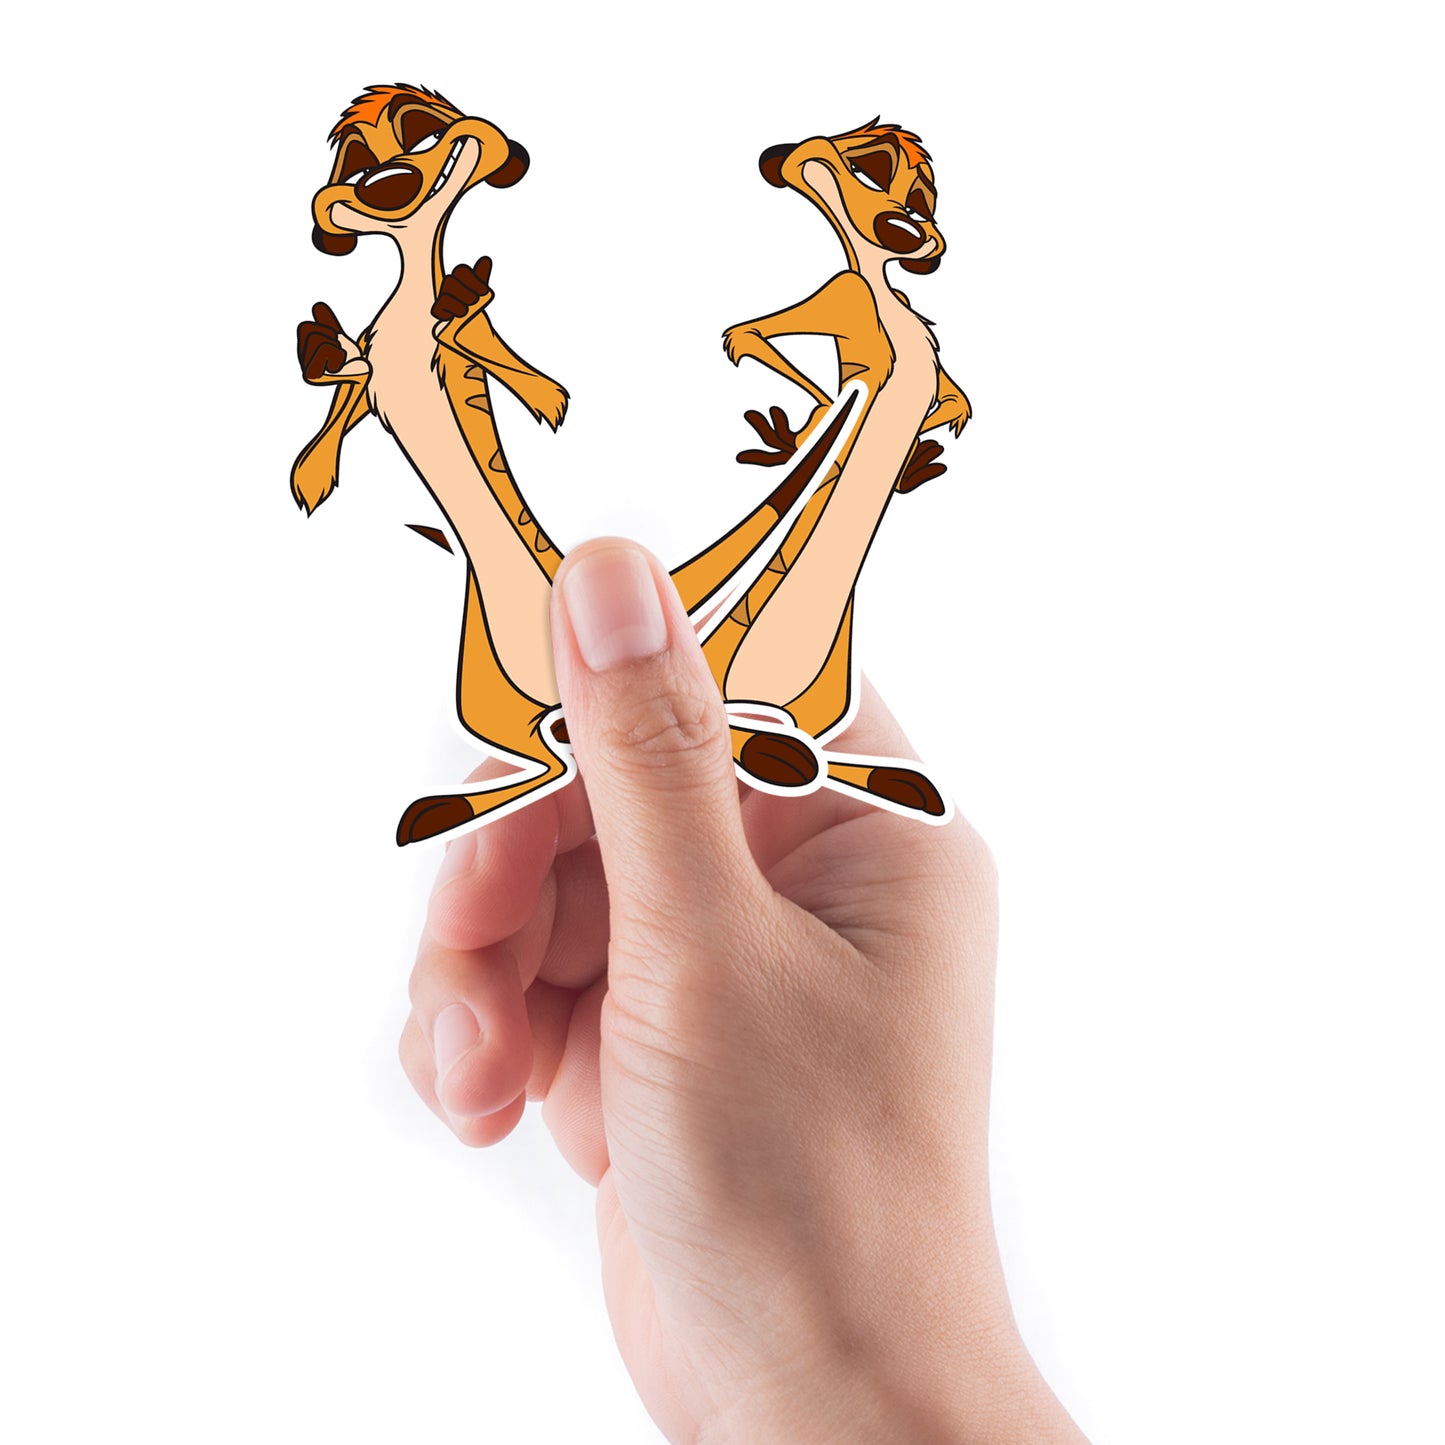 Sheet of 4 -Lion King: Timon Minis        - Officially Licensed Disney Removable Wall   Adhesive Decal